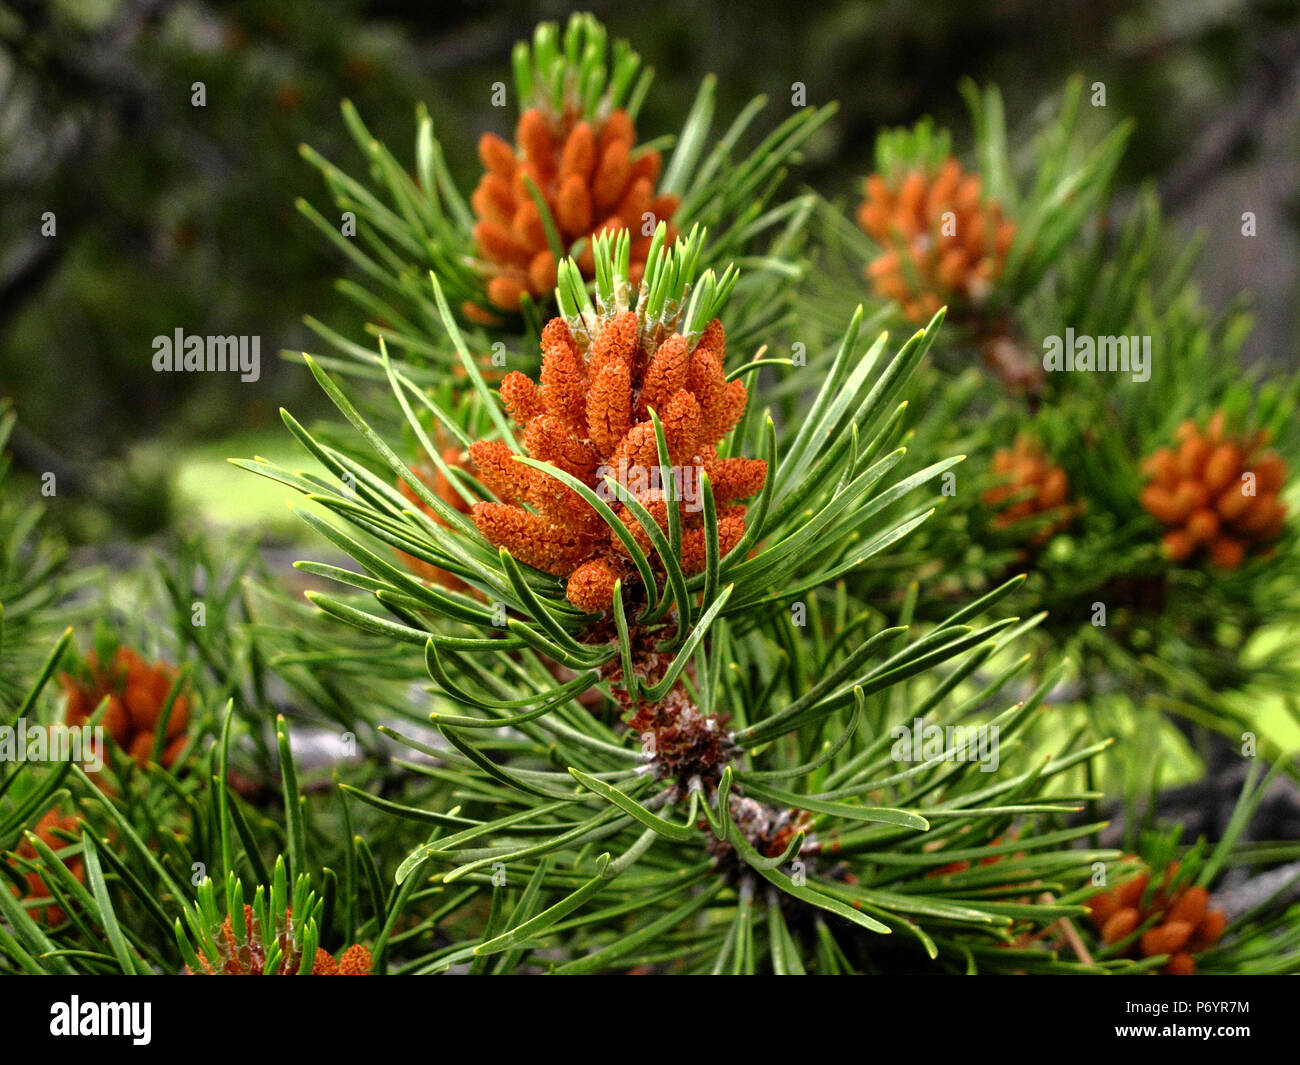 New Growing Pine Cones of the Lodgepole Pine Tree in the Uintah Range of the Western Rocky Mountains Stock Photo